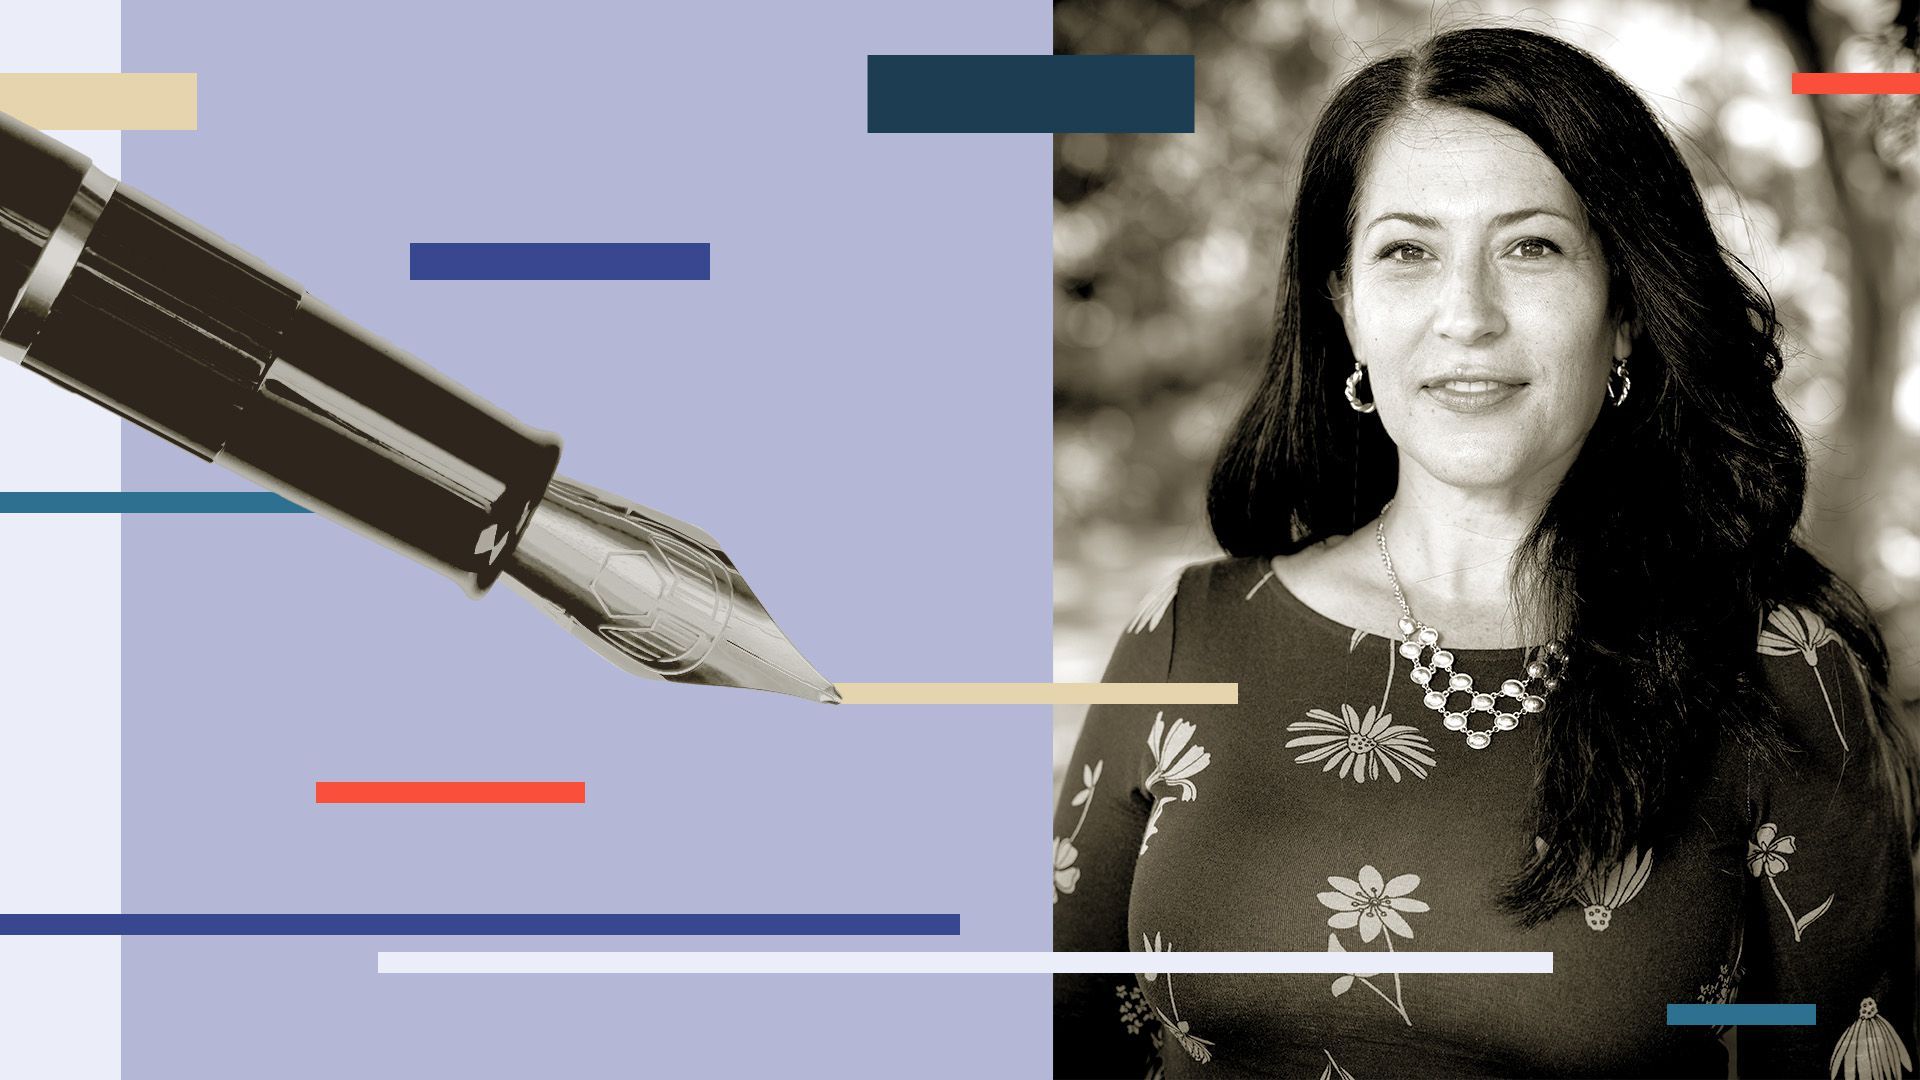 Photo illustration of Ada Limón with a fountain pen and abstract shapes.